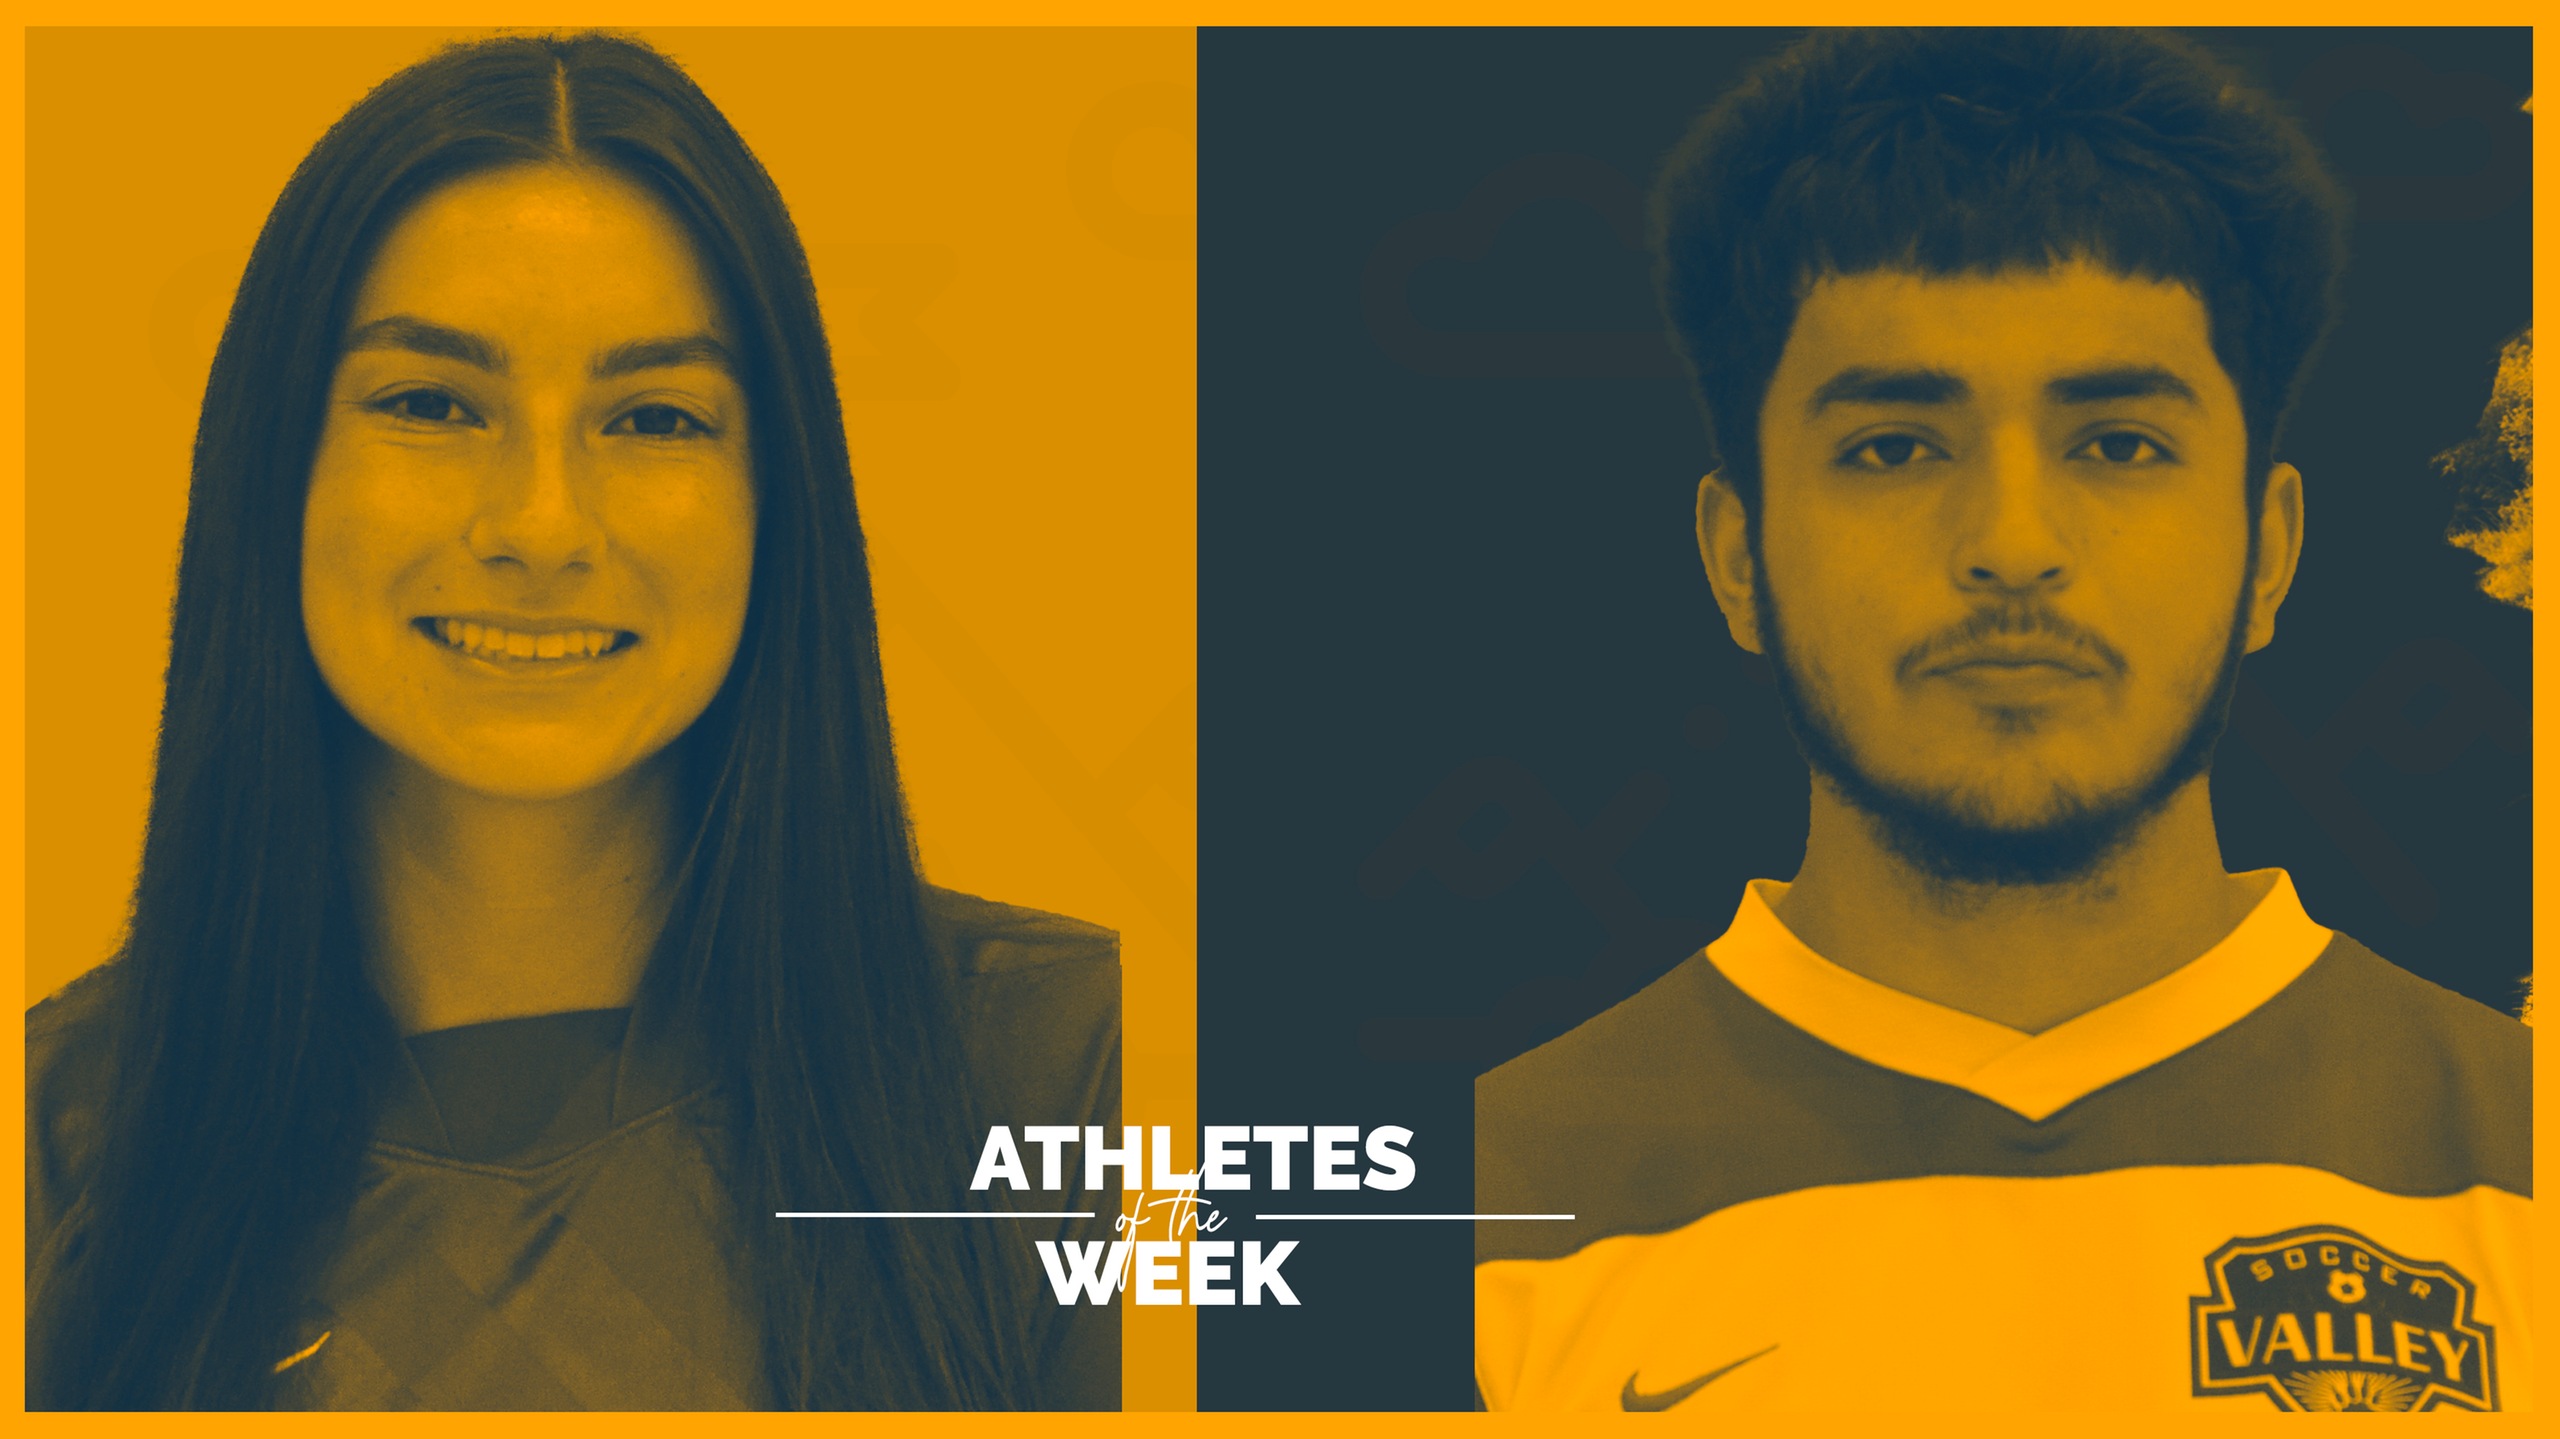 IEAC Athletes of the Week 9/25 - 9/29